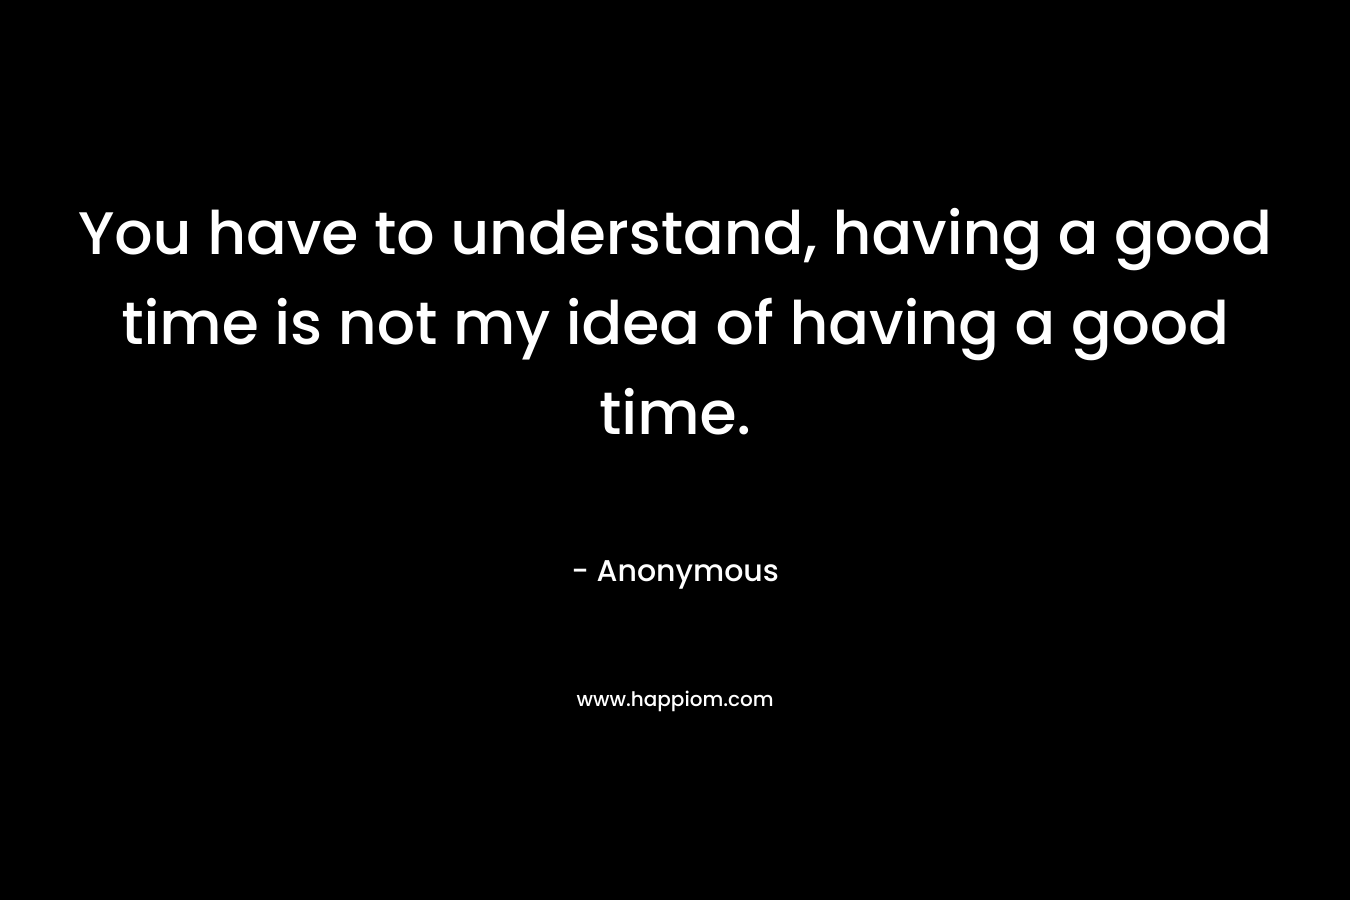 You have to understand, having a good time is not my idea of having a good time. – Anonymous